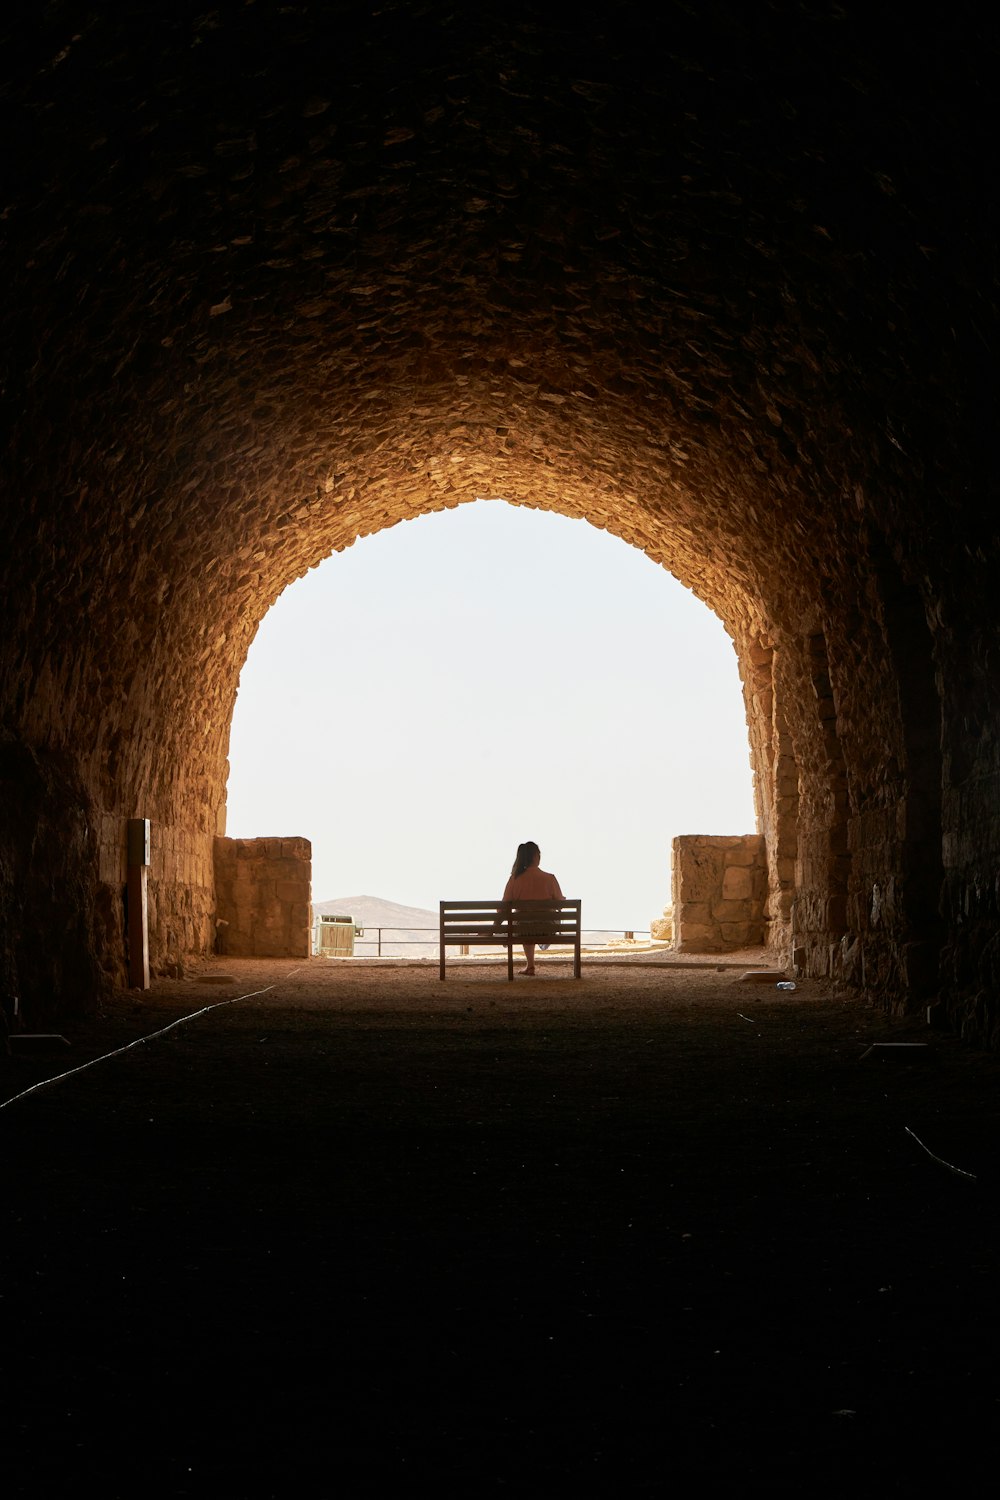 a person sitting on a bench in a tunnel